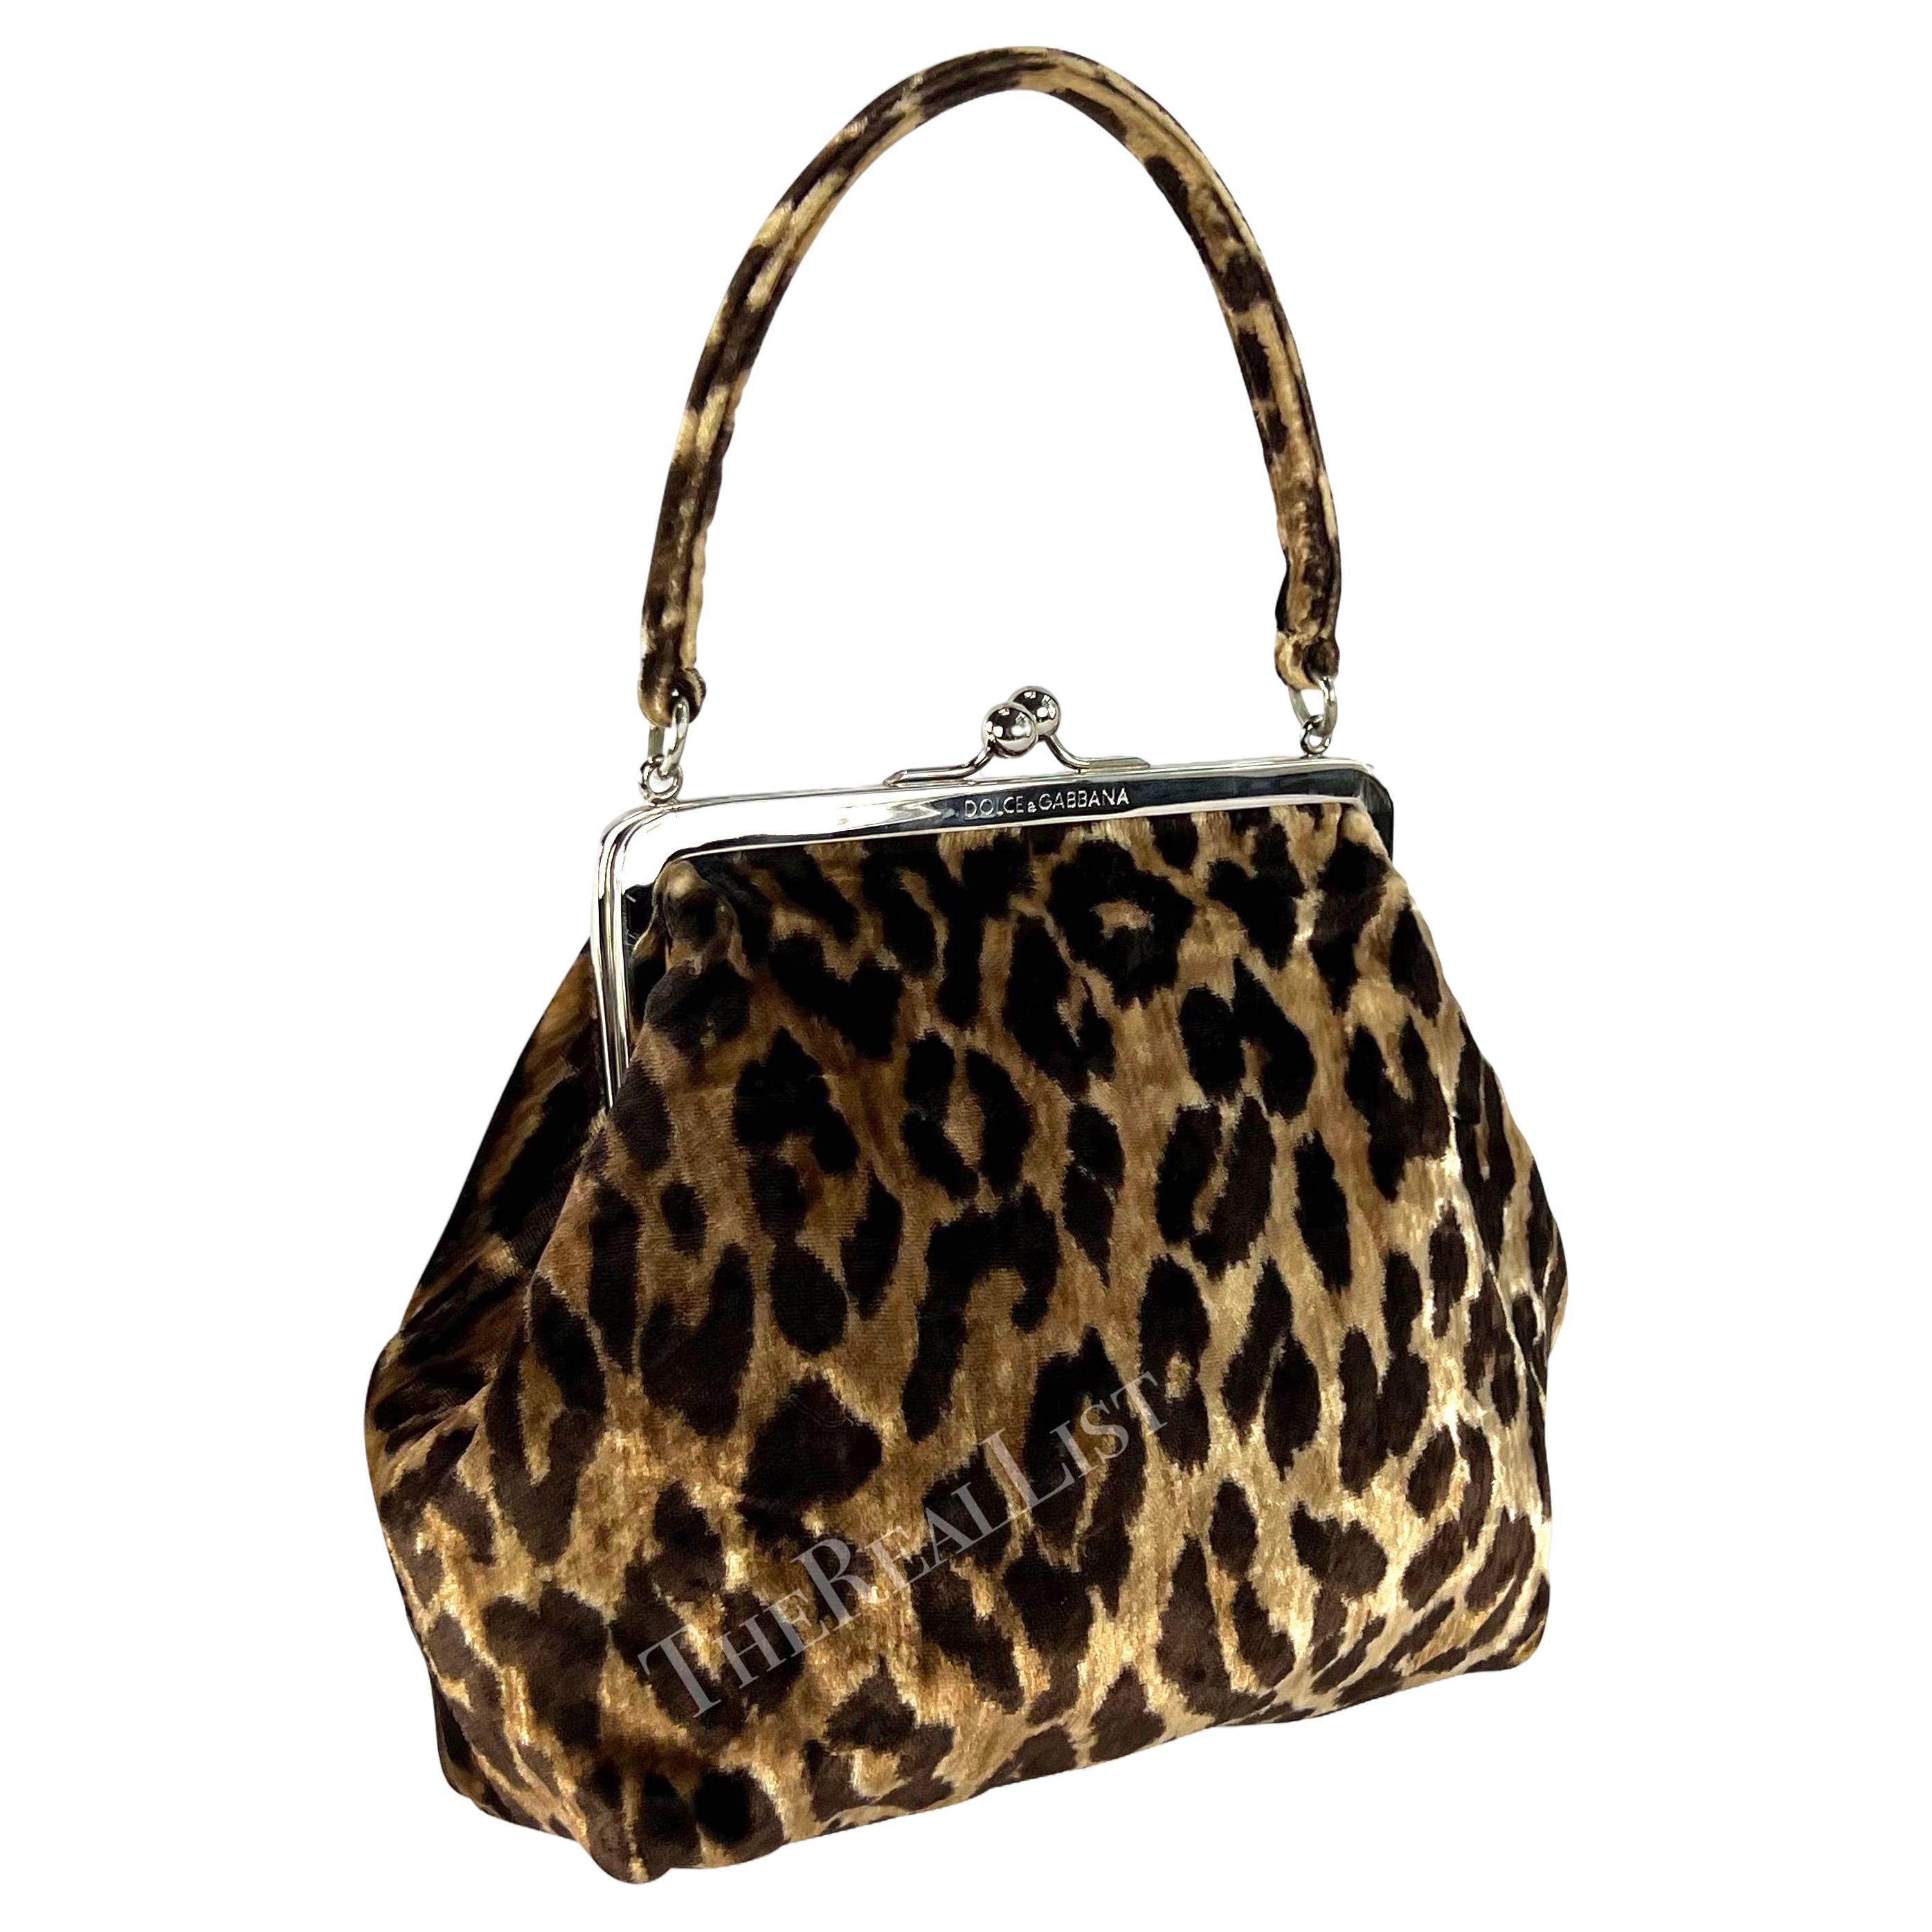 Presenting a chic velvet cheetah print Dolce & Gabbana evening bag. From the 1990s, this bag is constructed entirely of soft cheetah print velvet. The bag features a top handle and is made complete with a silver-tone clam shell closure.